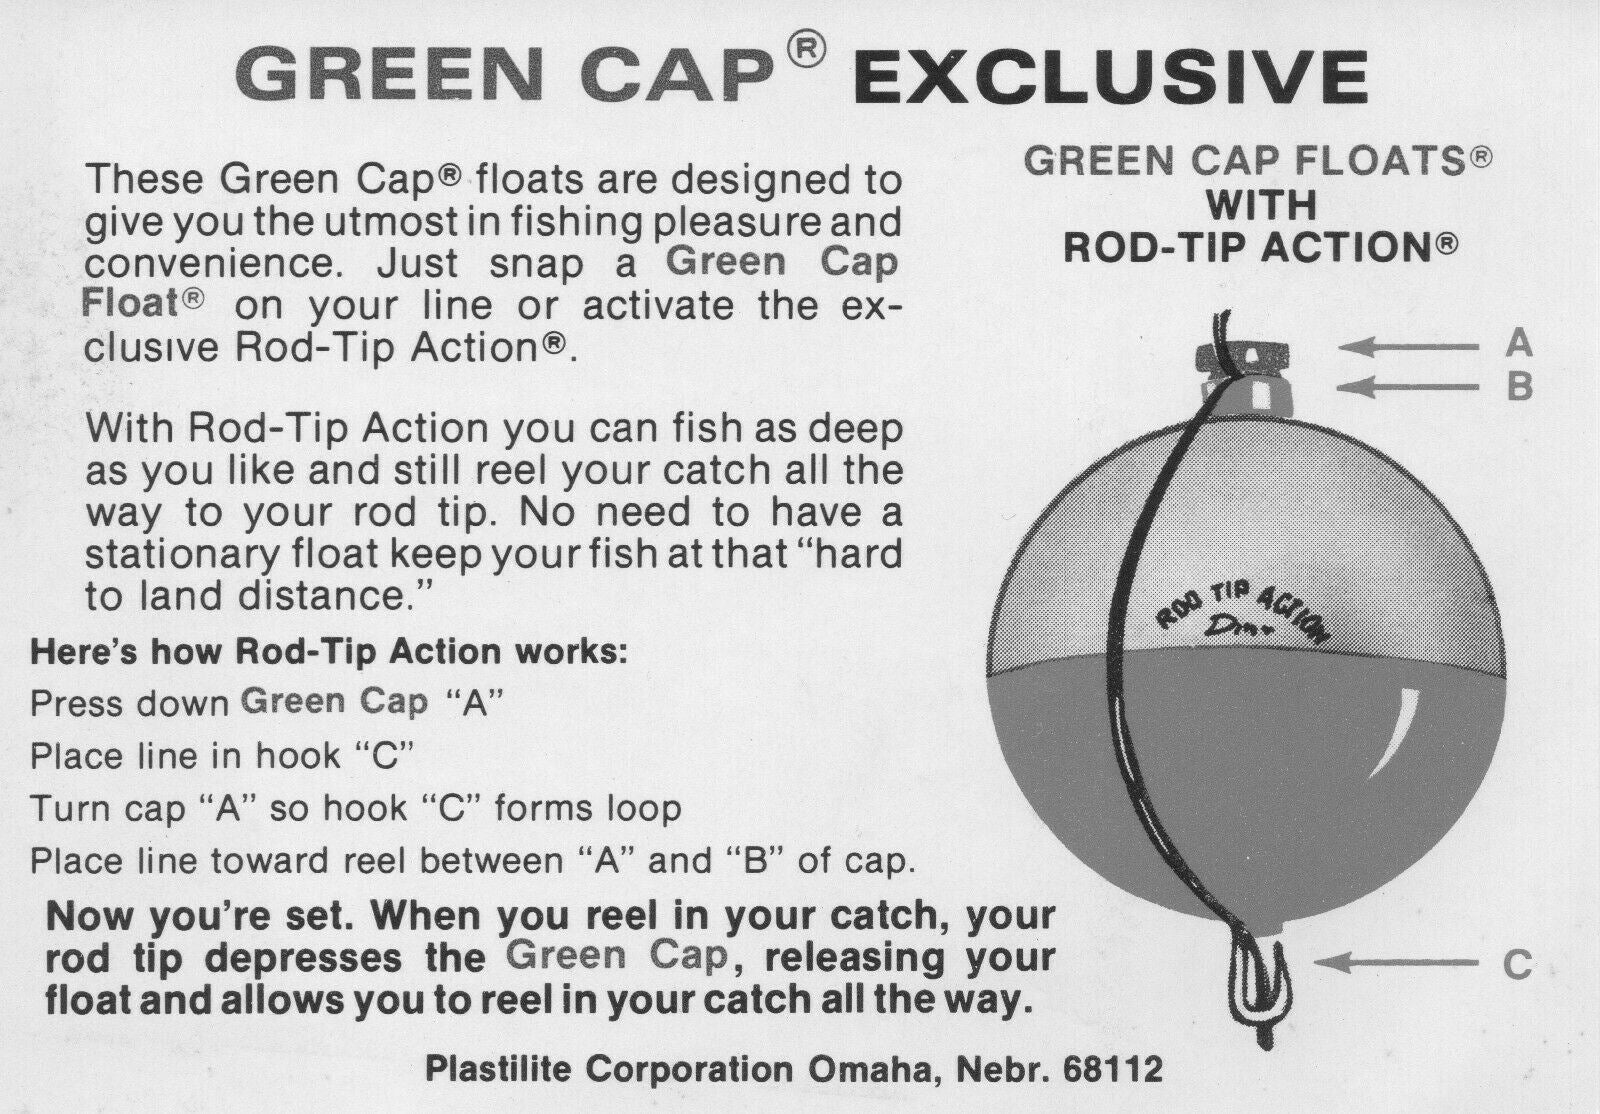 rebelFIN - 1.5 inch Round - GREEN CAPS - Fishing Bobber - Red & White –  Two Rock Sports